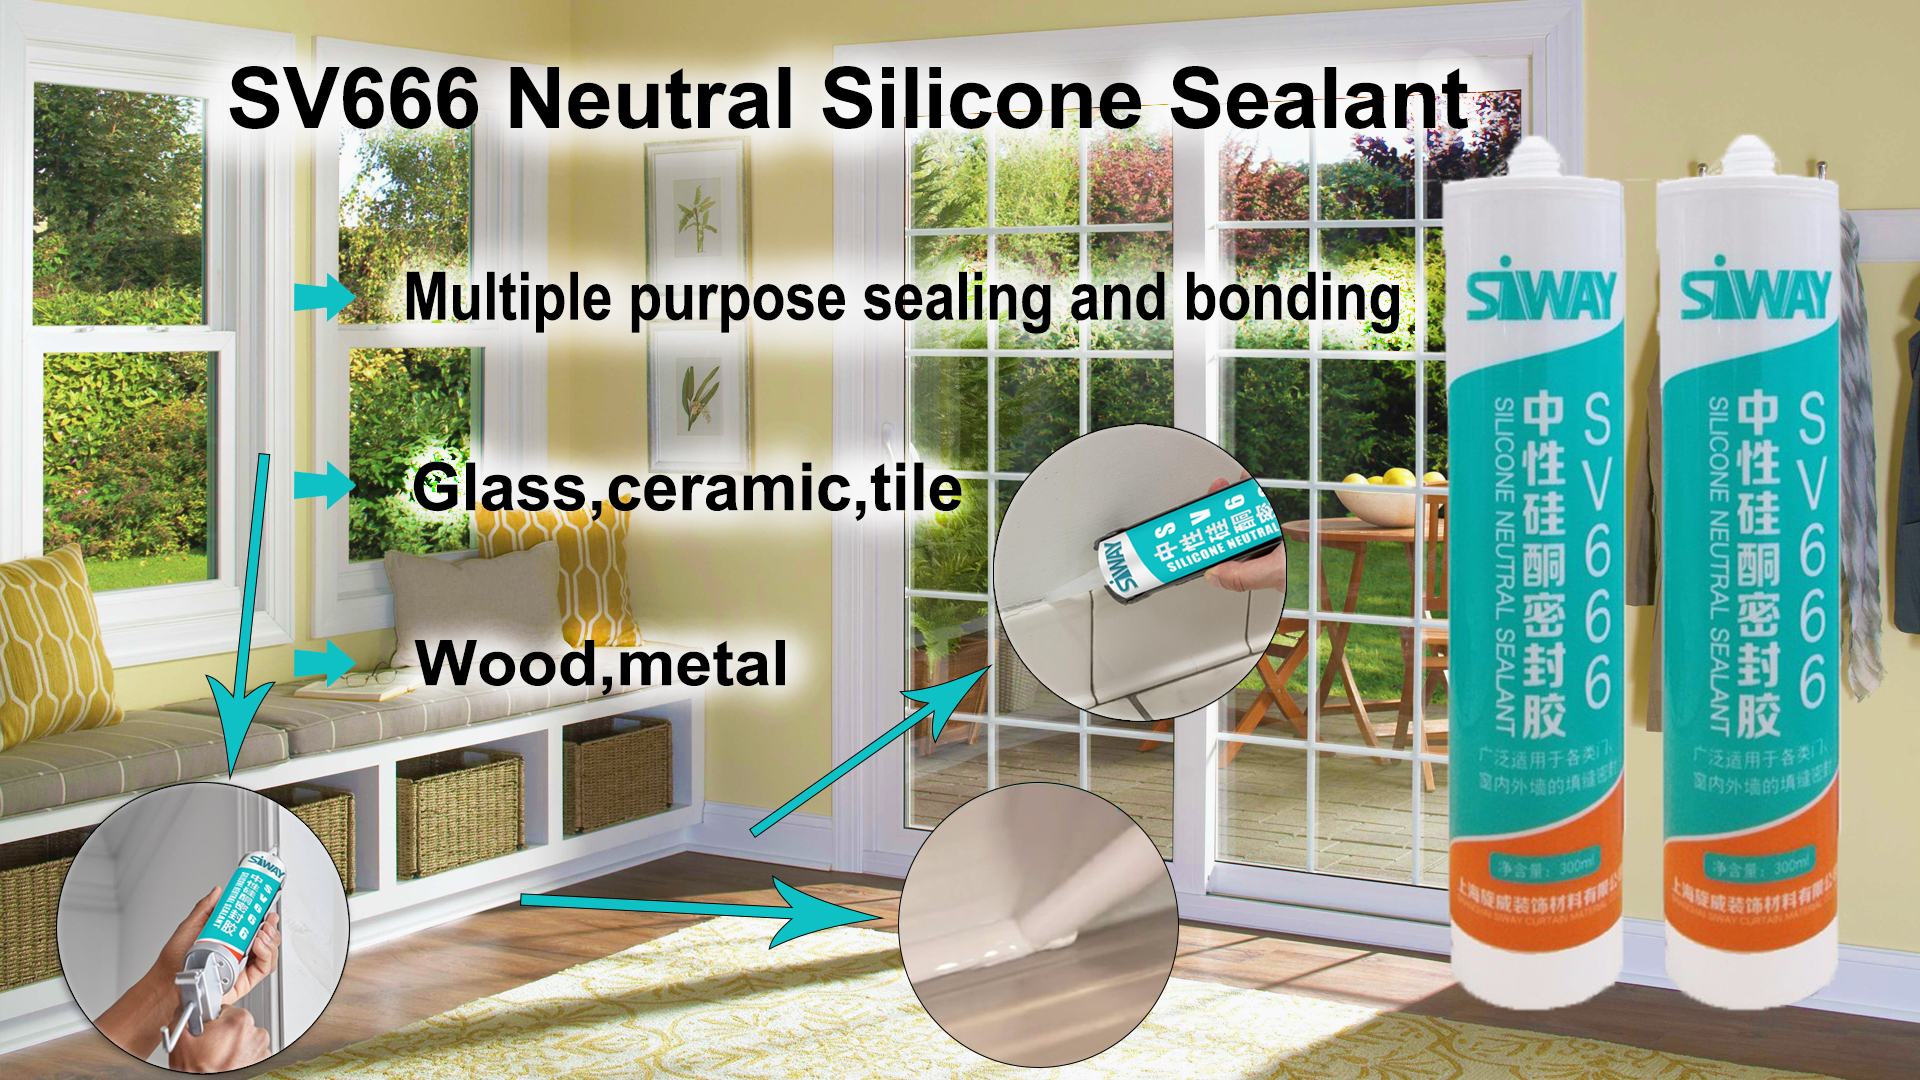 The Second Phase of Siway Sealant——General Purpose Neutral Silicone Sealant